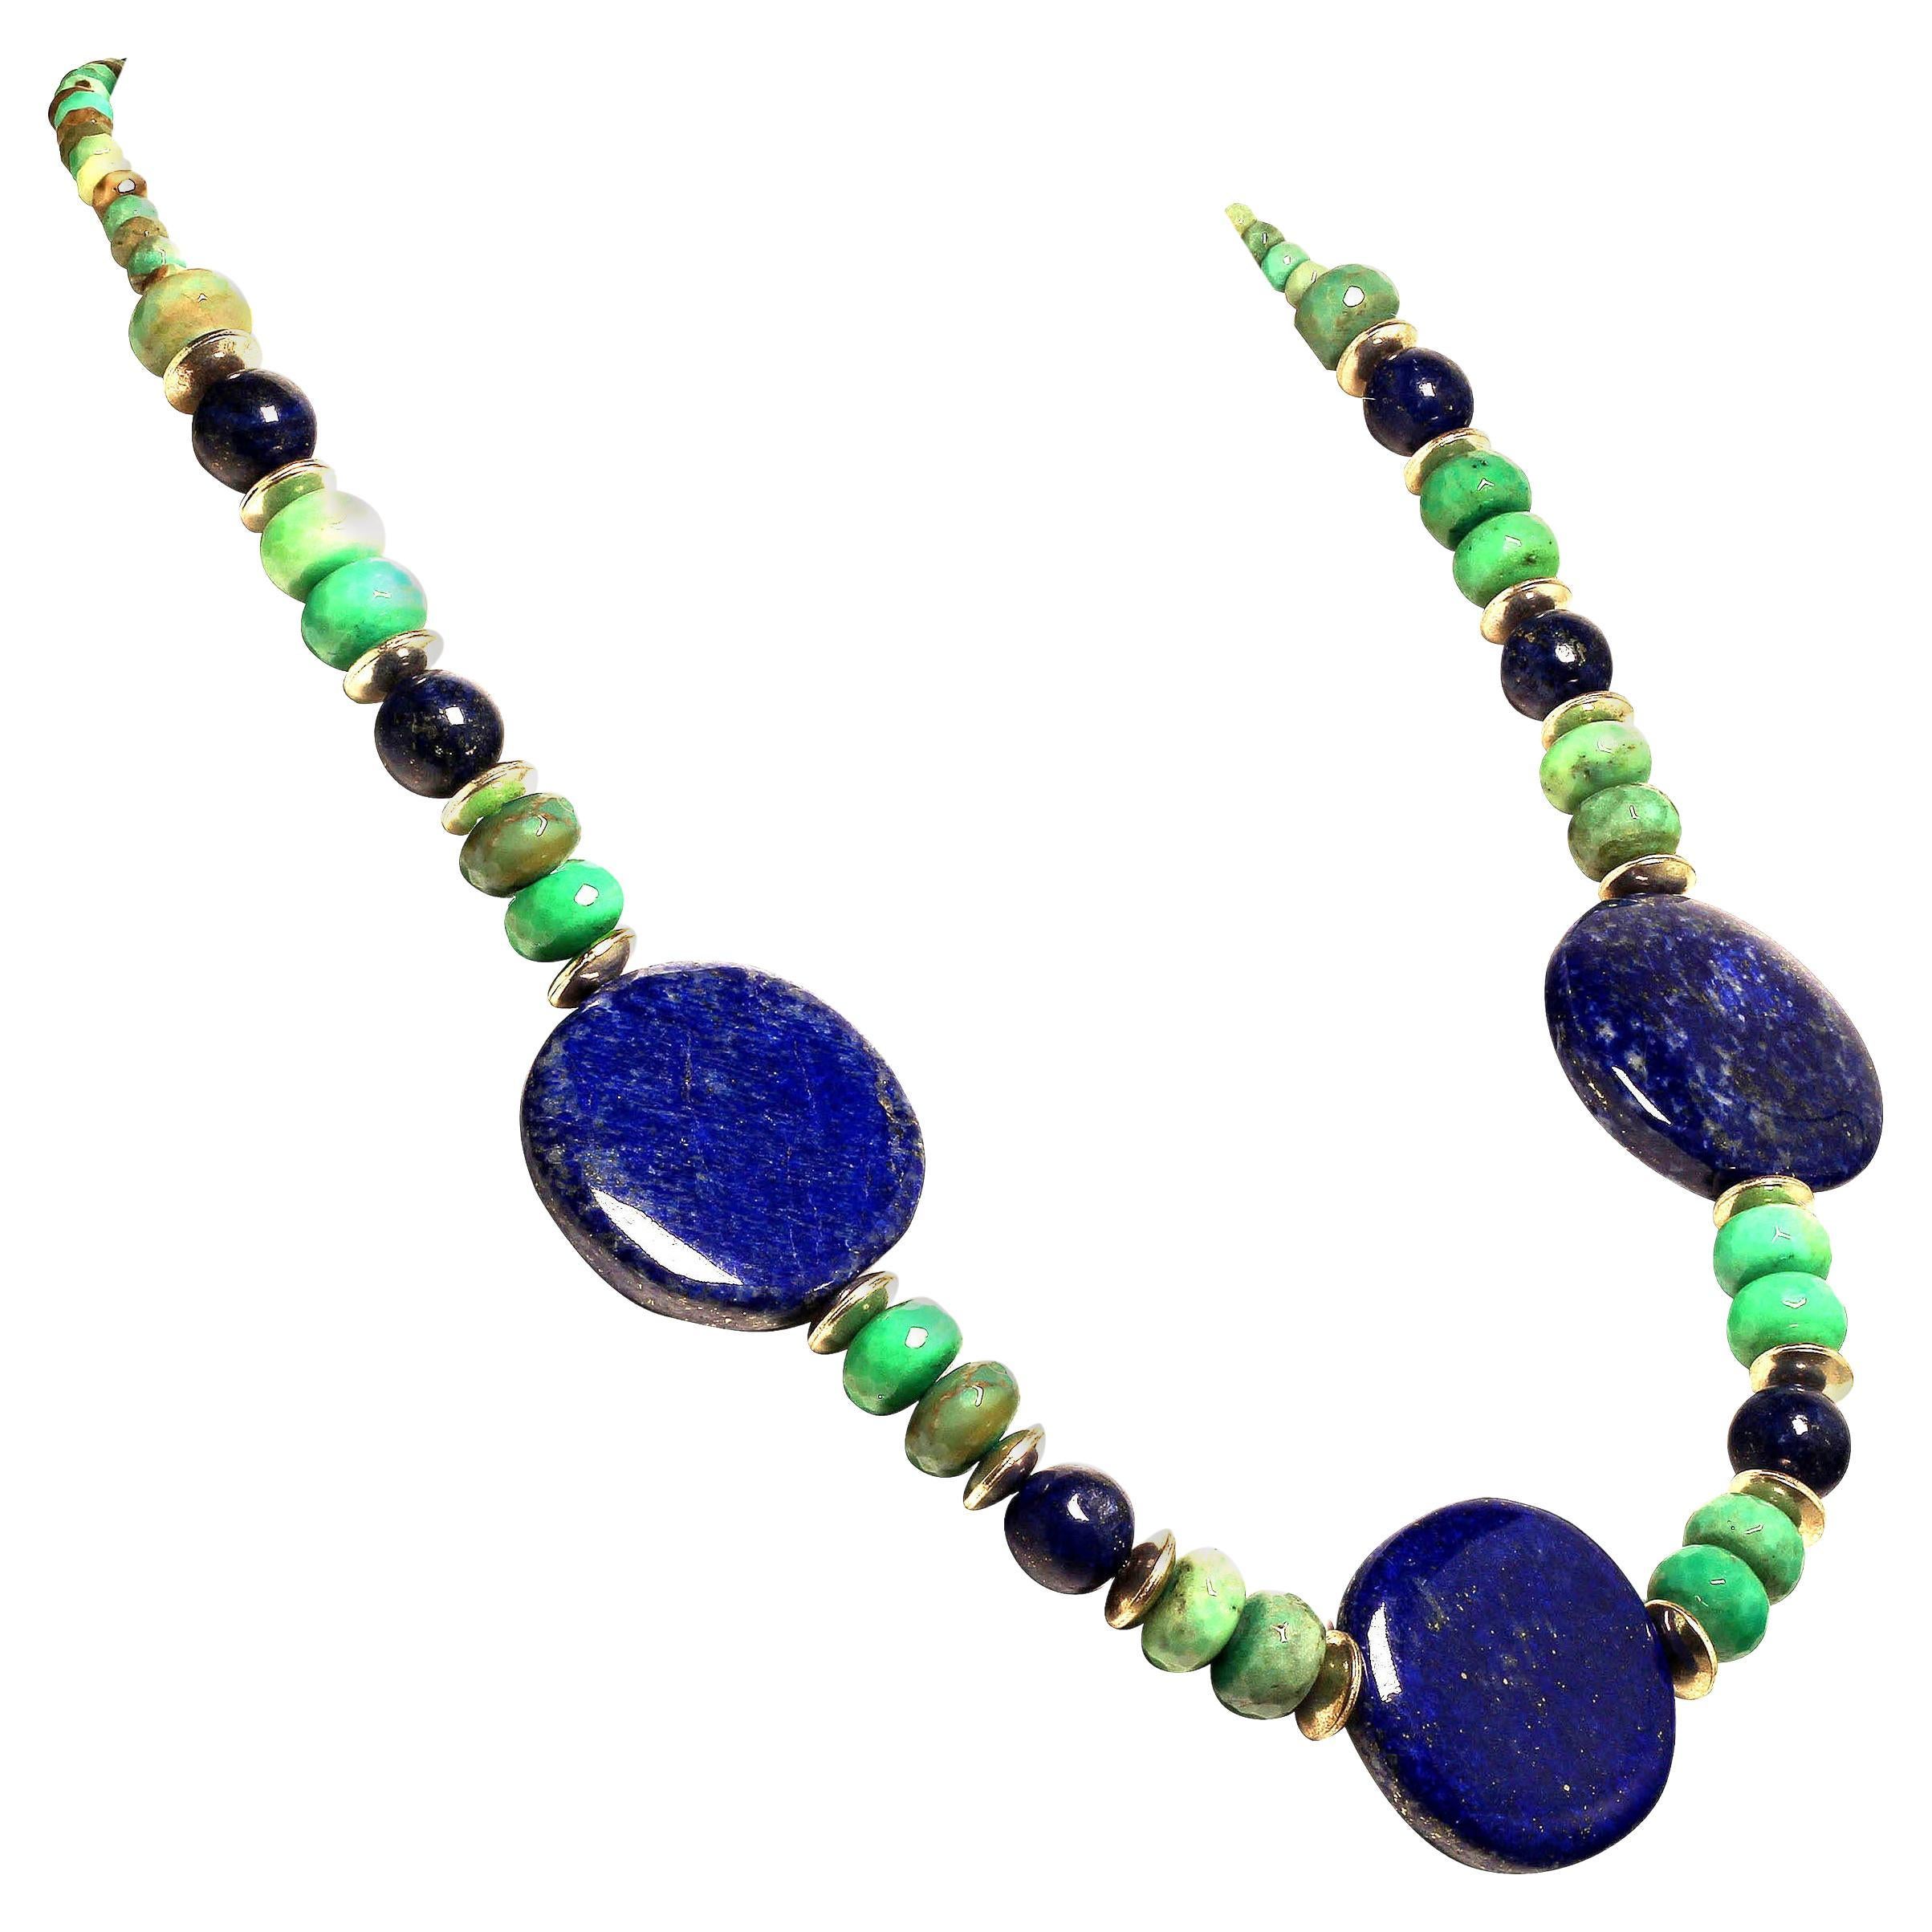 AJD Statement Necklace in Lapis Lazuli, Chrysoprase, and Silver